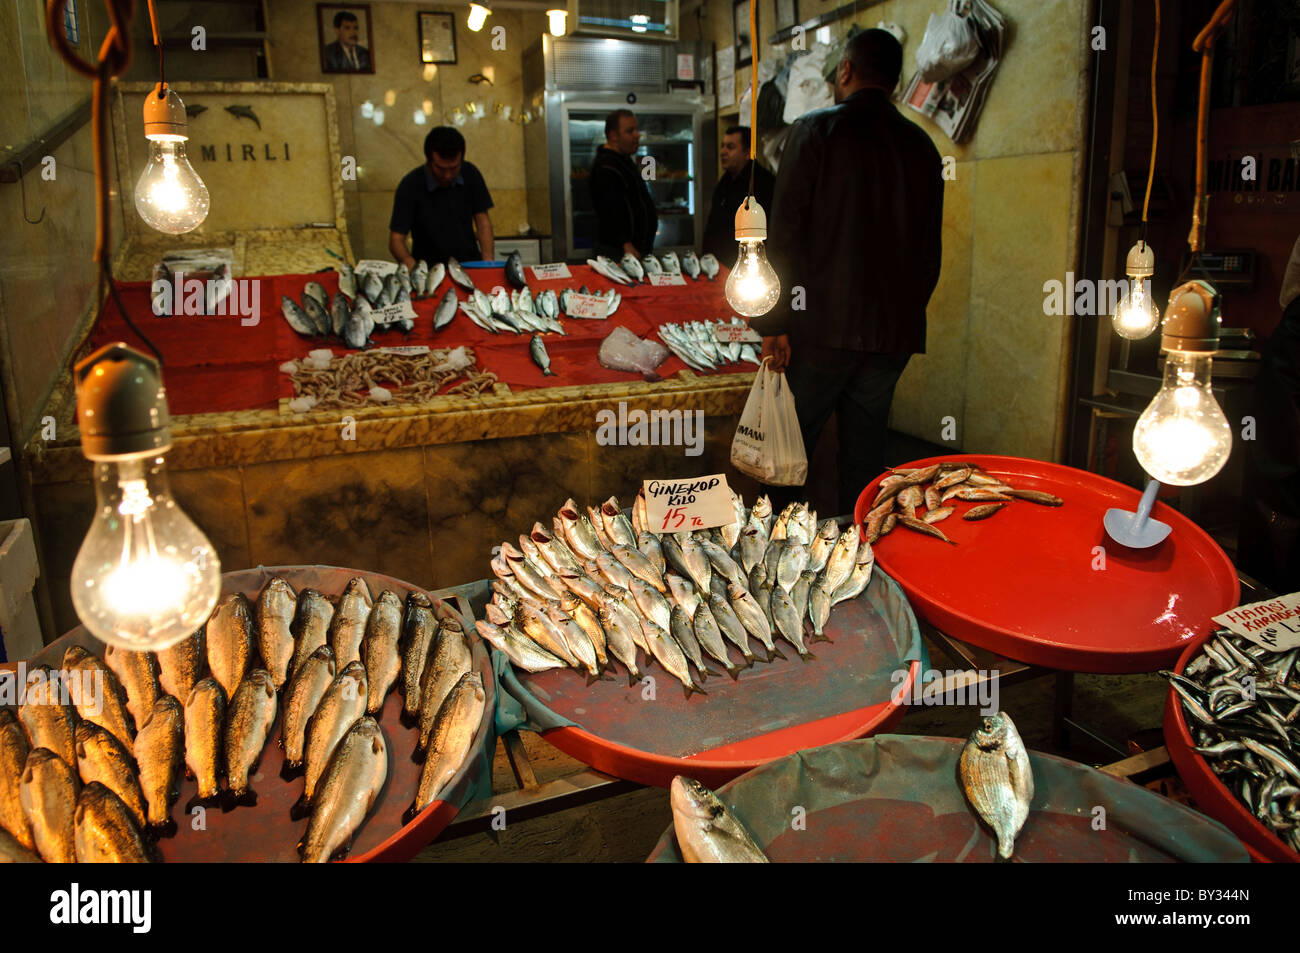 Customers buying fish at a fish shope next to the Spice Bazaar (also known as the Egyption Bazaar) in Istanbul, Turkey. Stock Photo